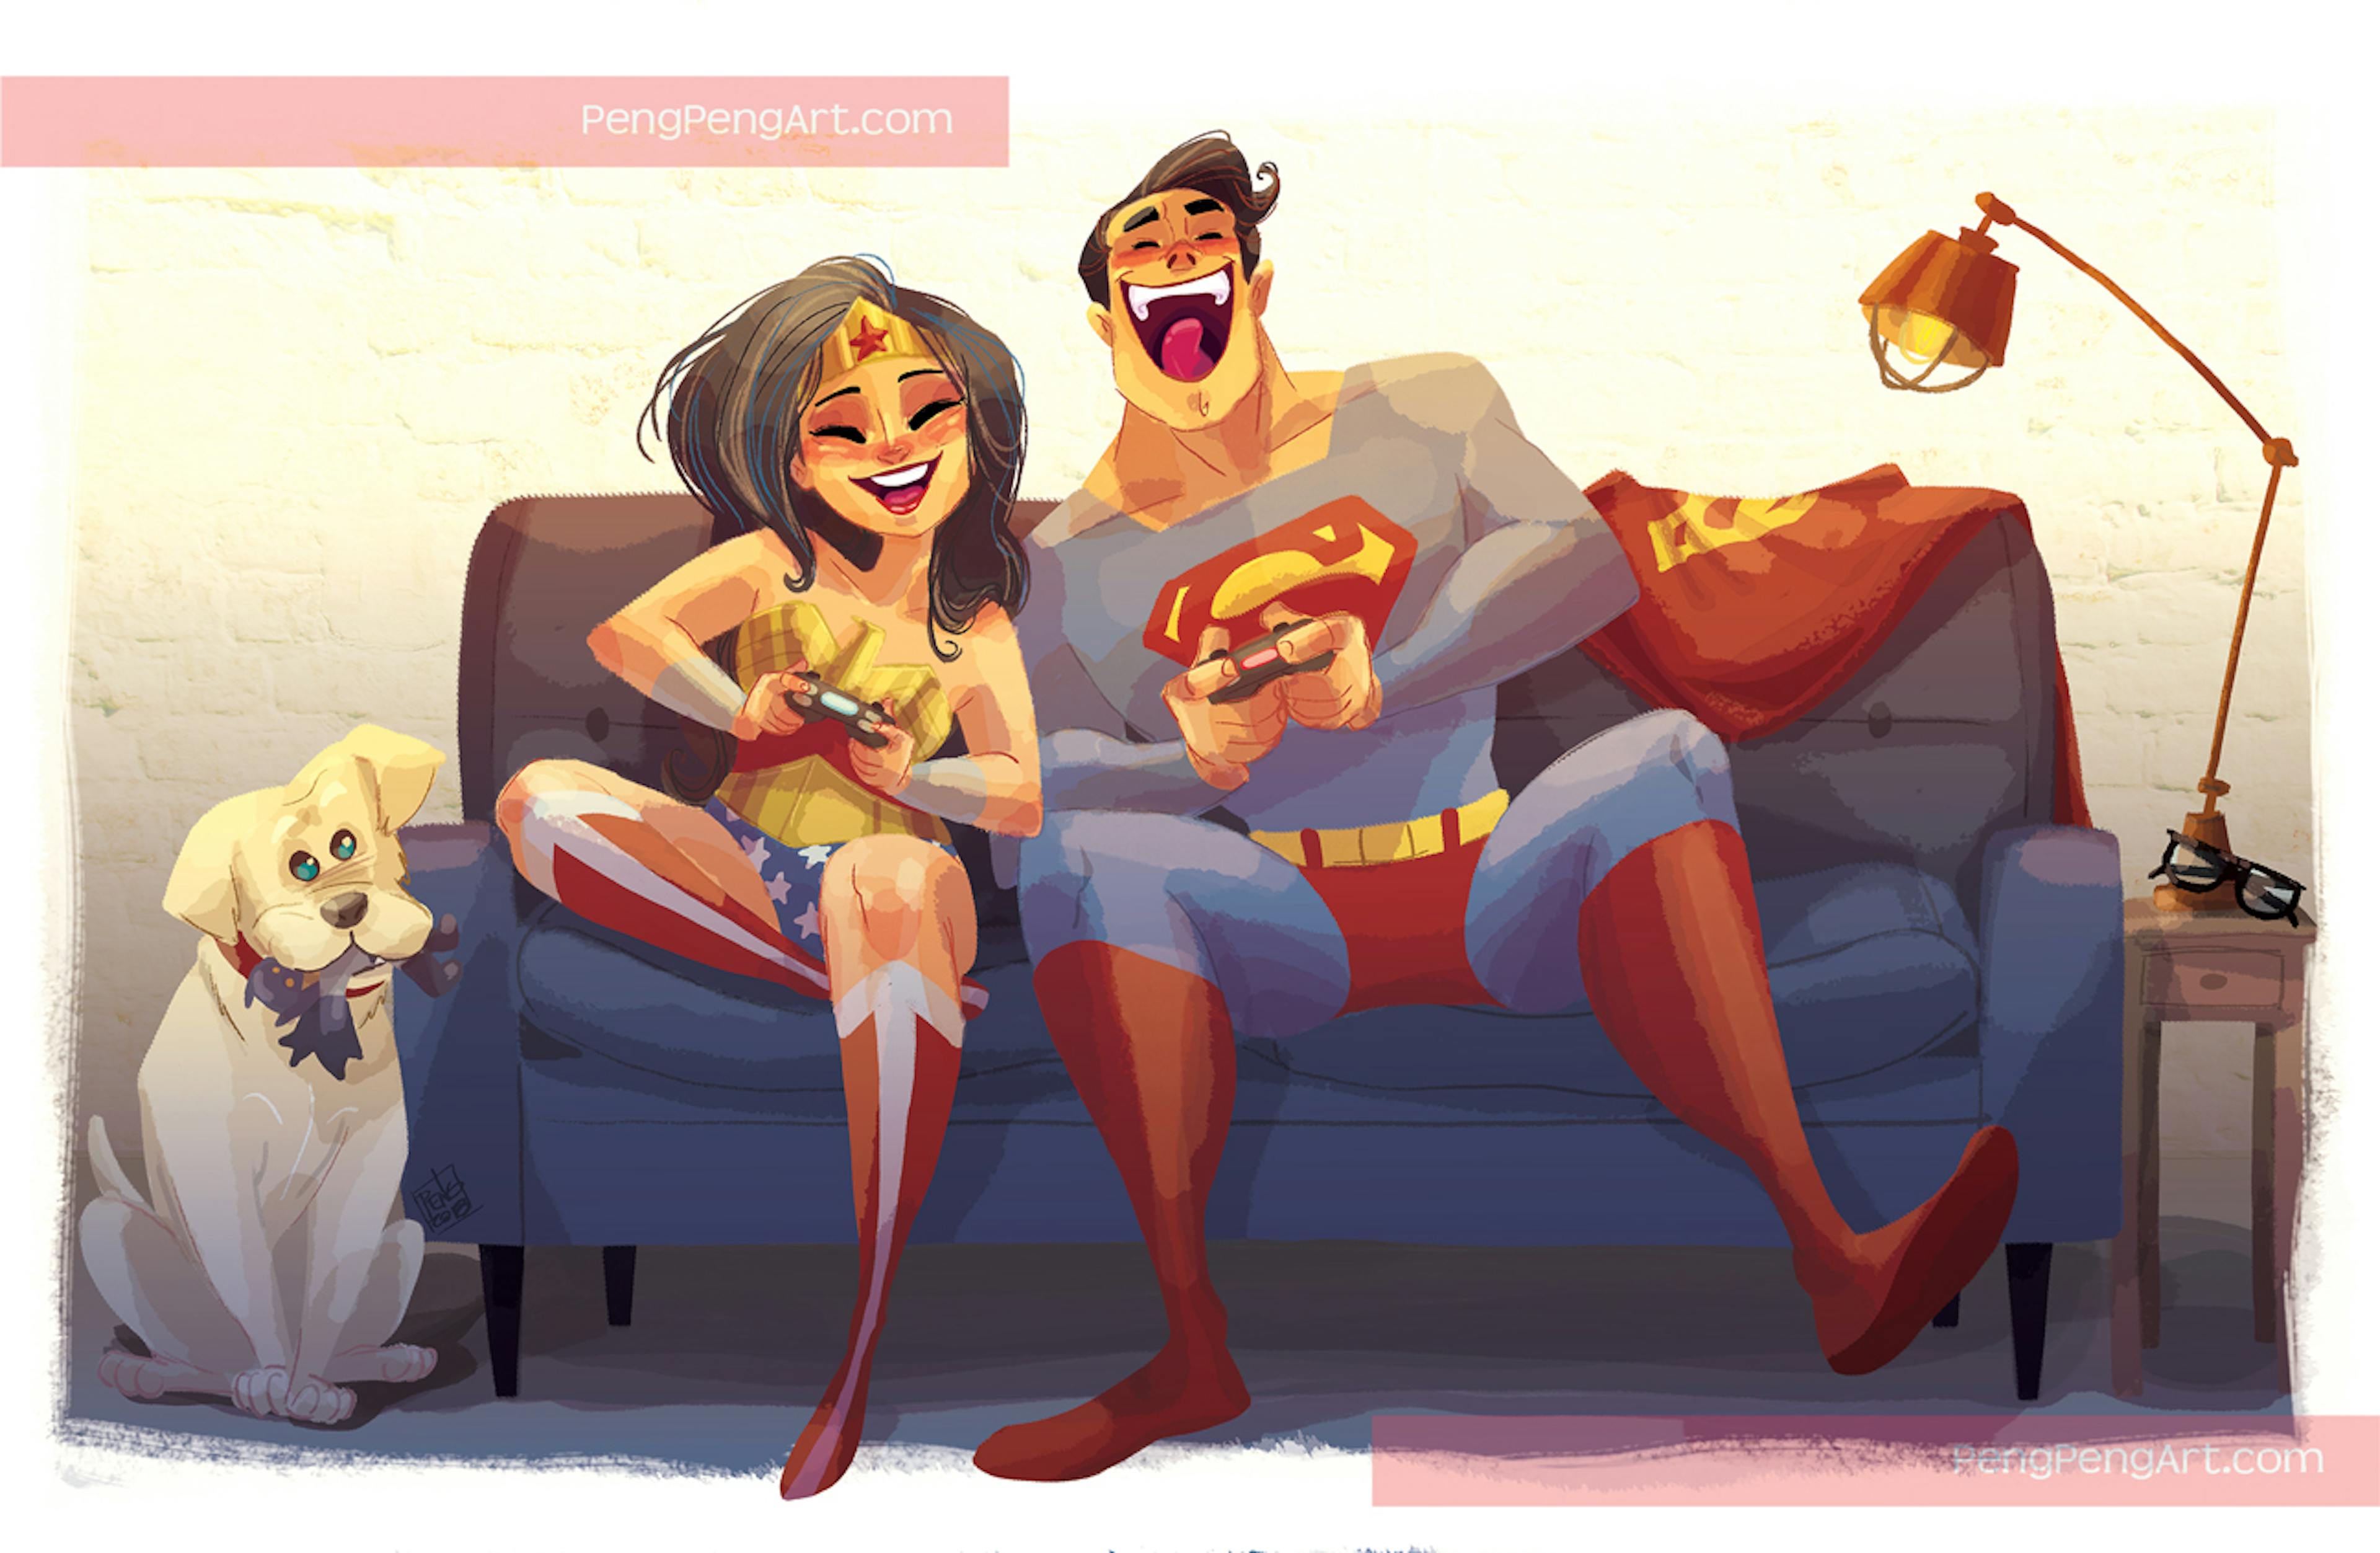 Wonder Woman and Superman playing video games on the couch